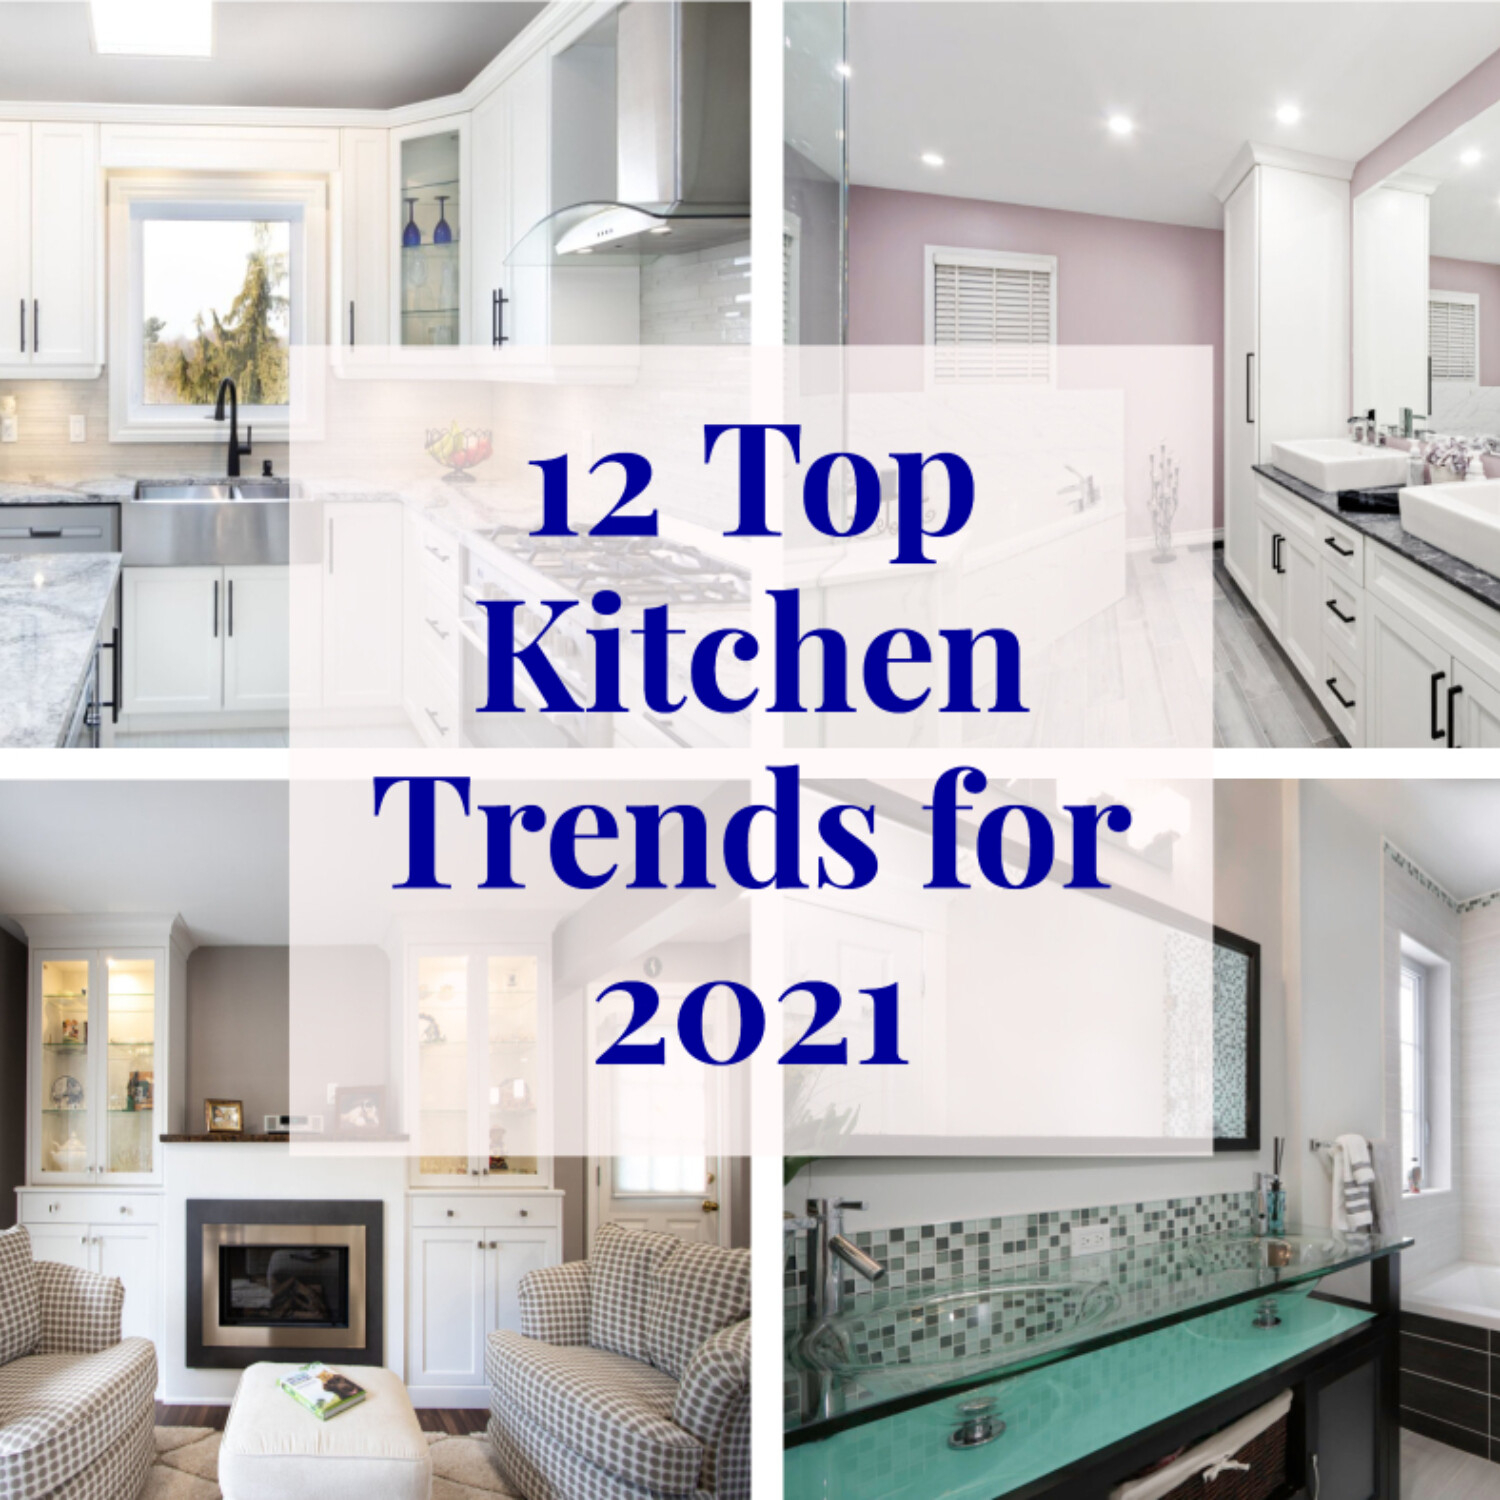 12 Top Kitchen Trends for 2021 | Love Your Home on Acast